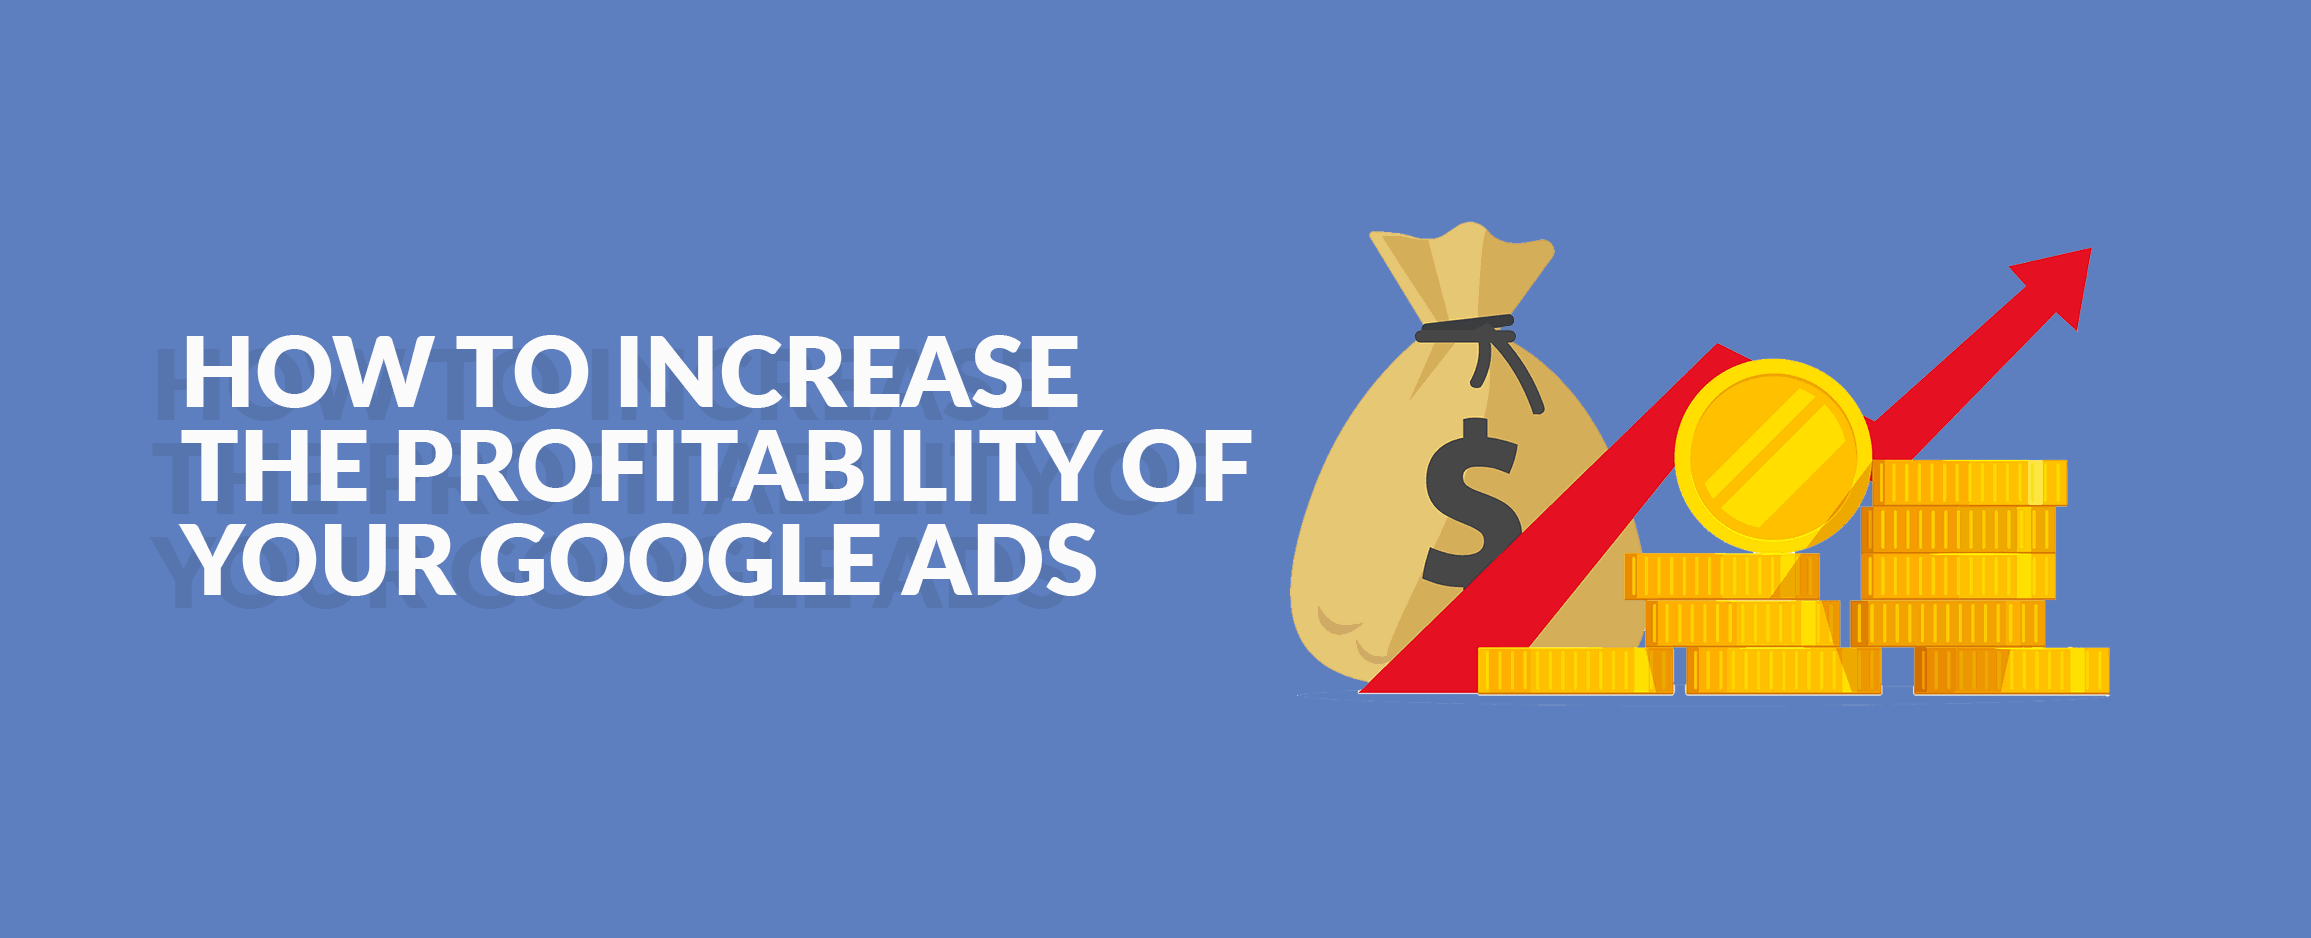 How To Increase The Profitability Of your Google Ads